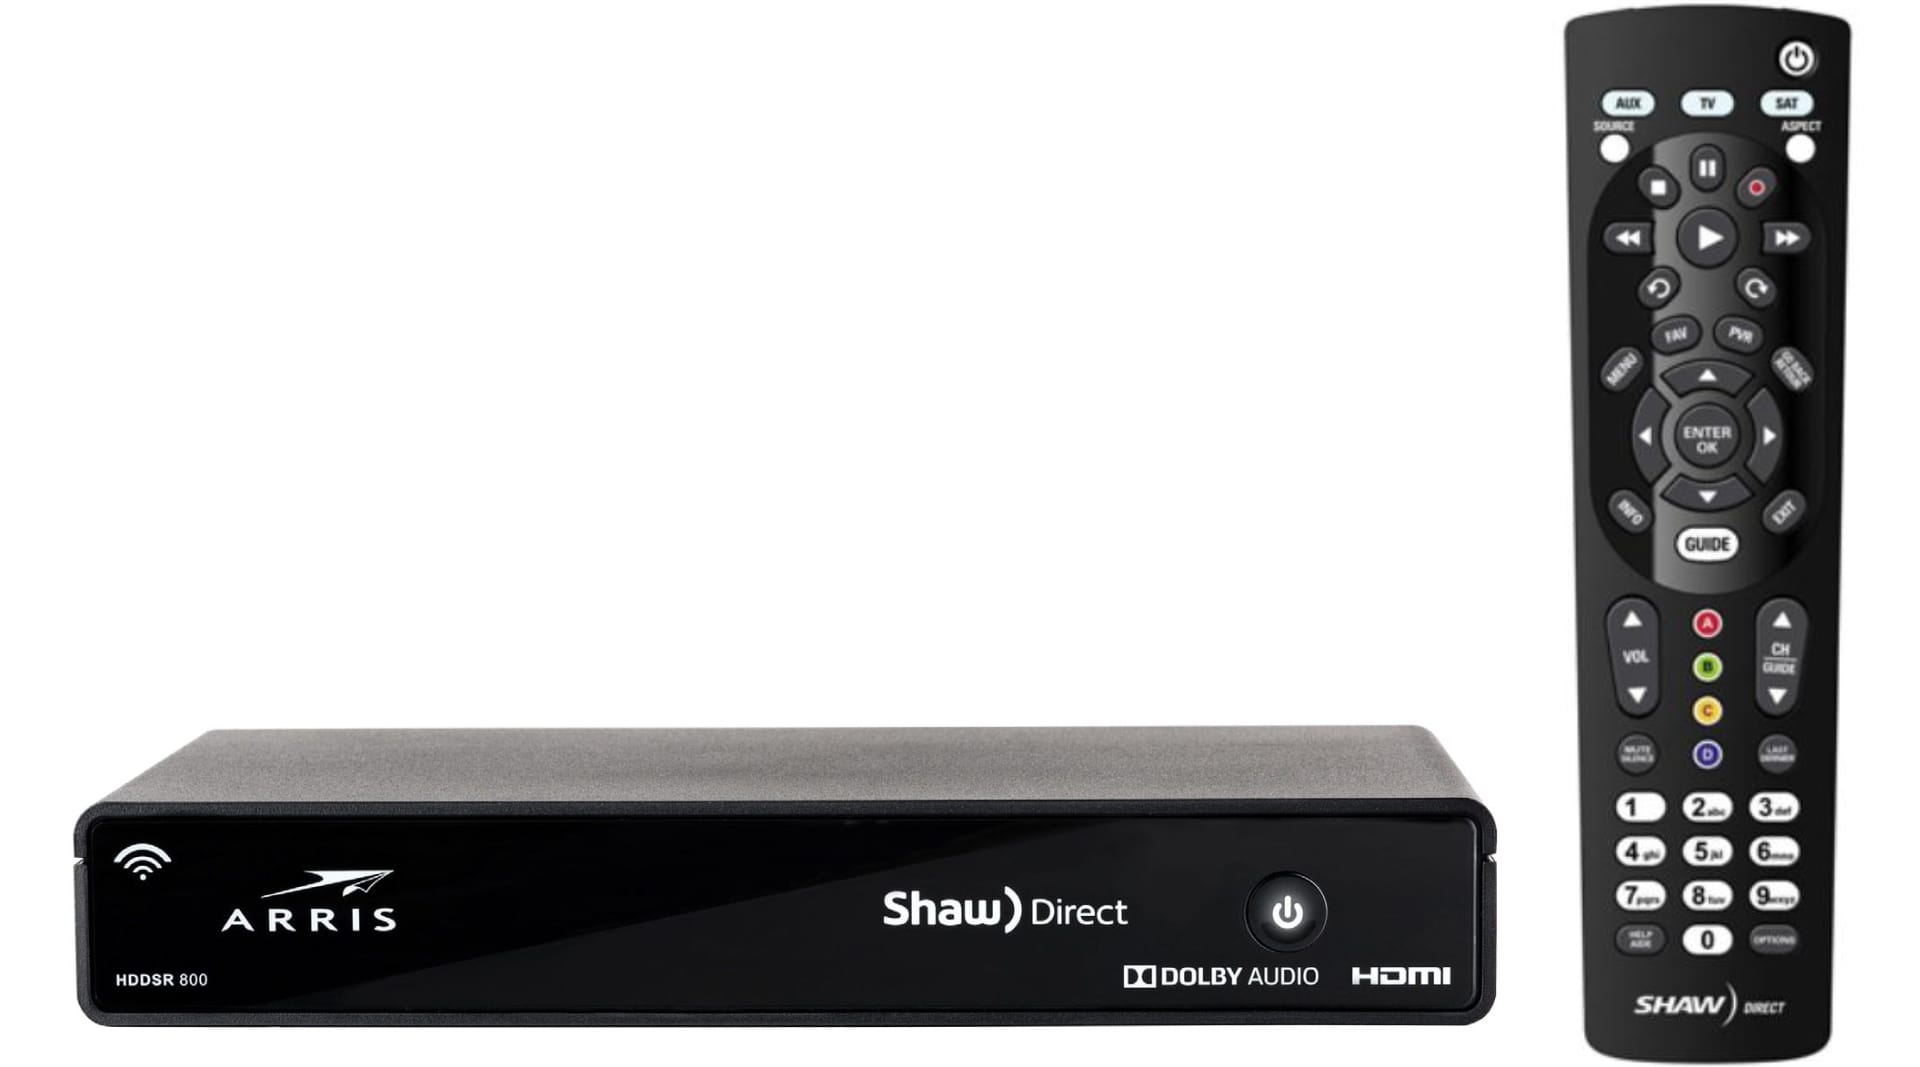 Shaw Direct decoder and remote with TV